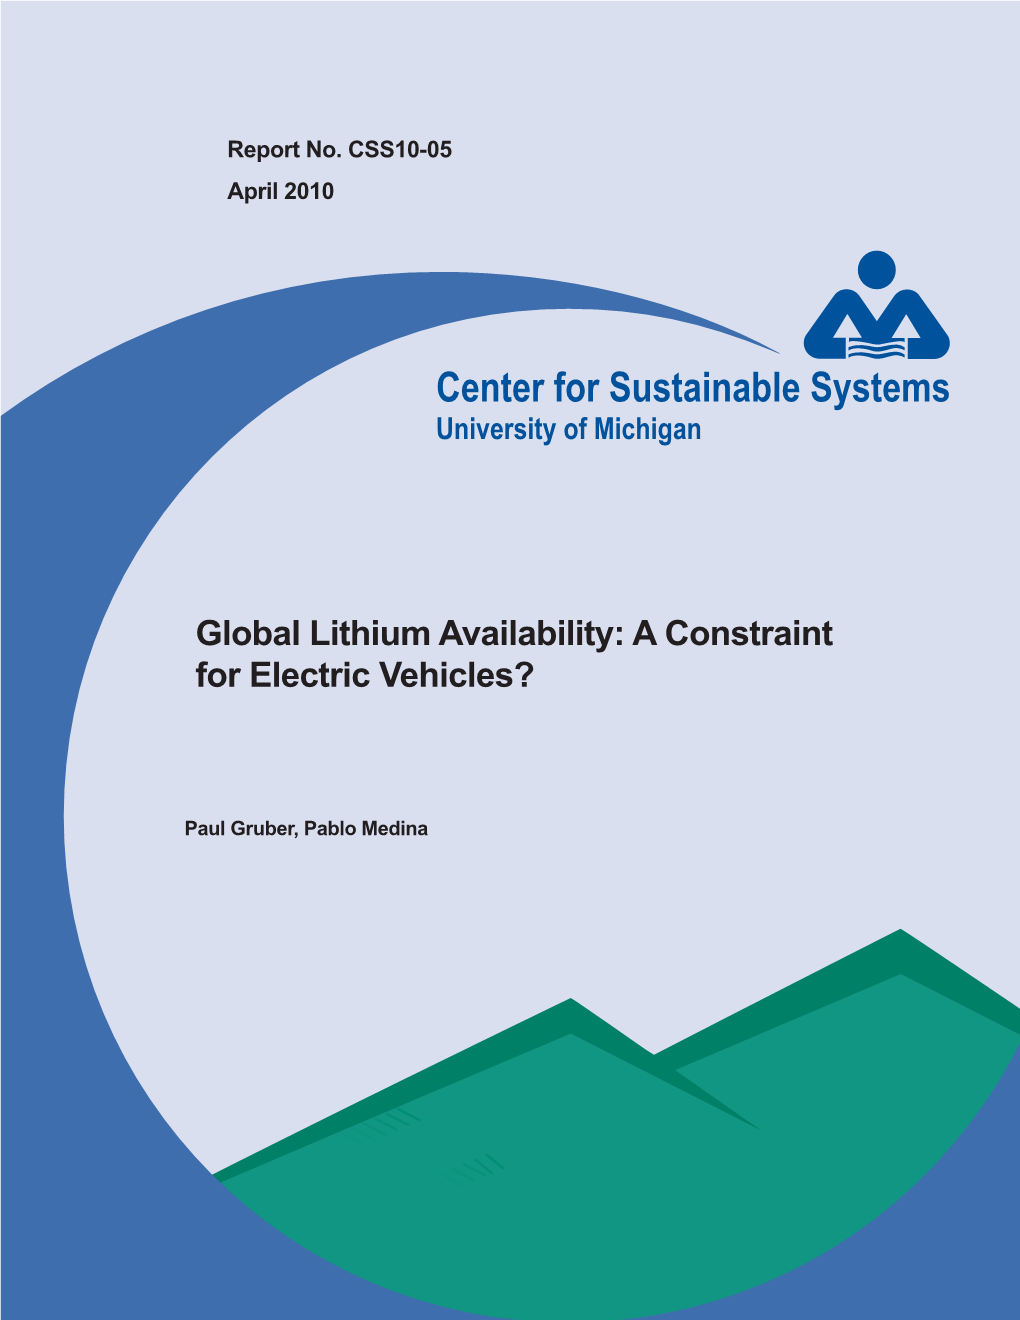 Global Lithium Availability: a Constraint for Electric Vehicles?